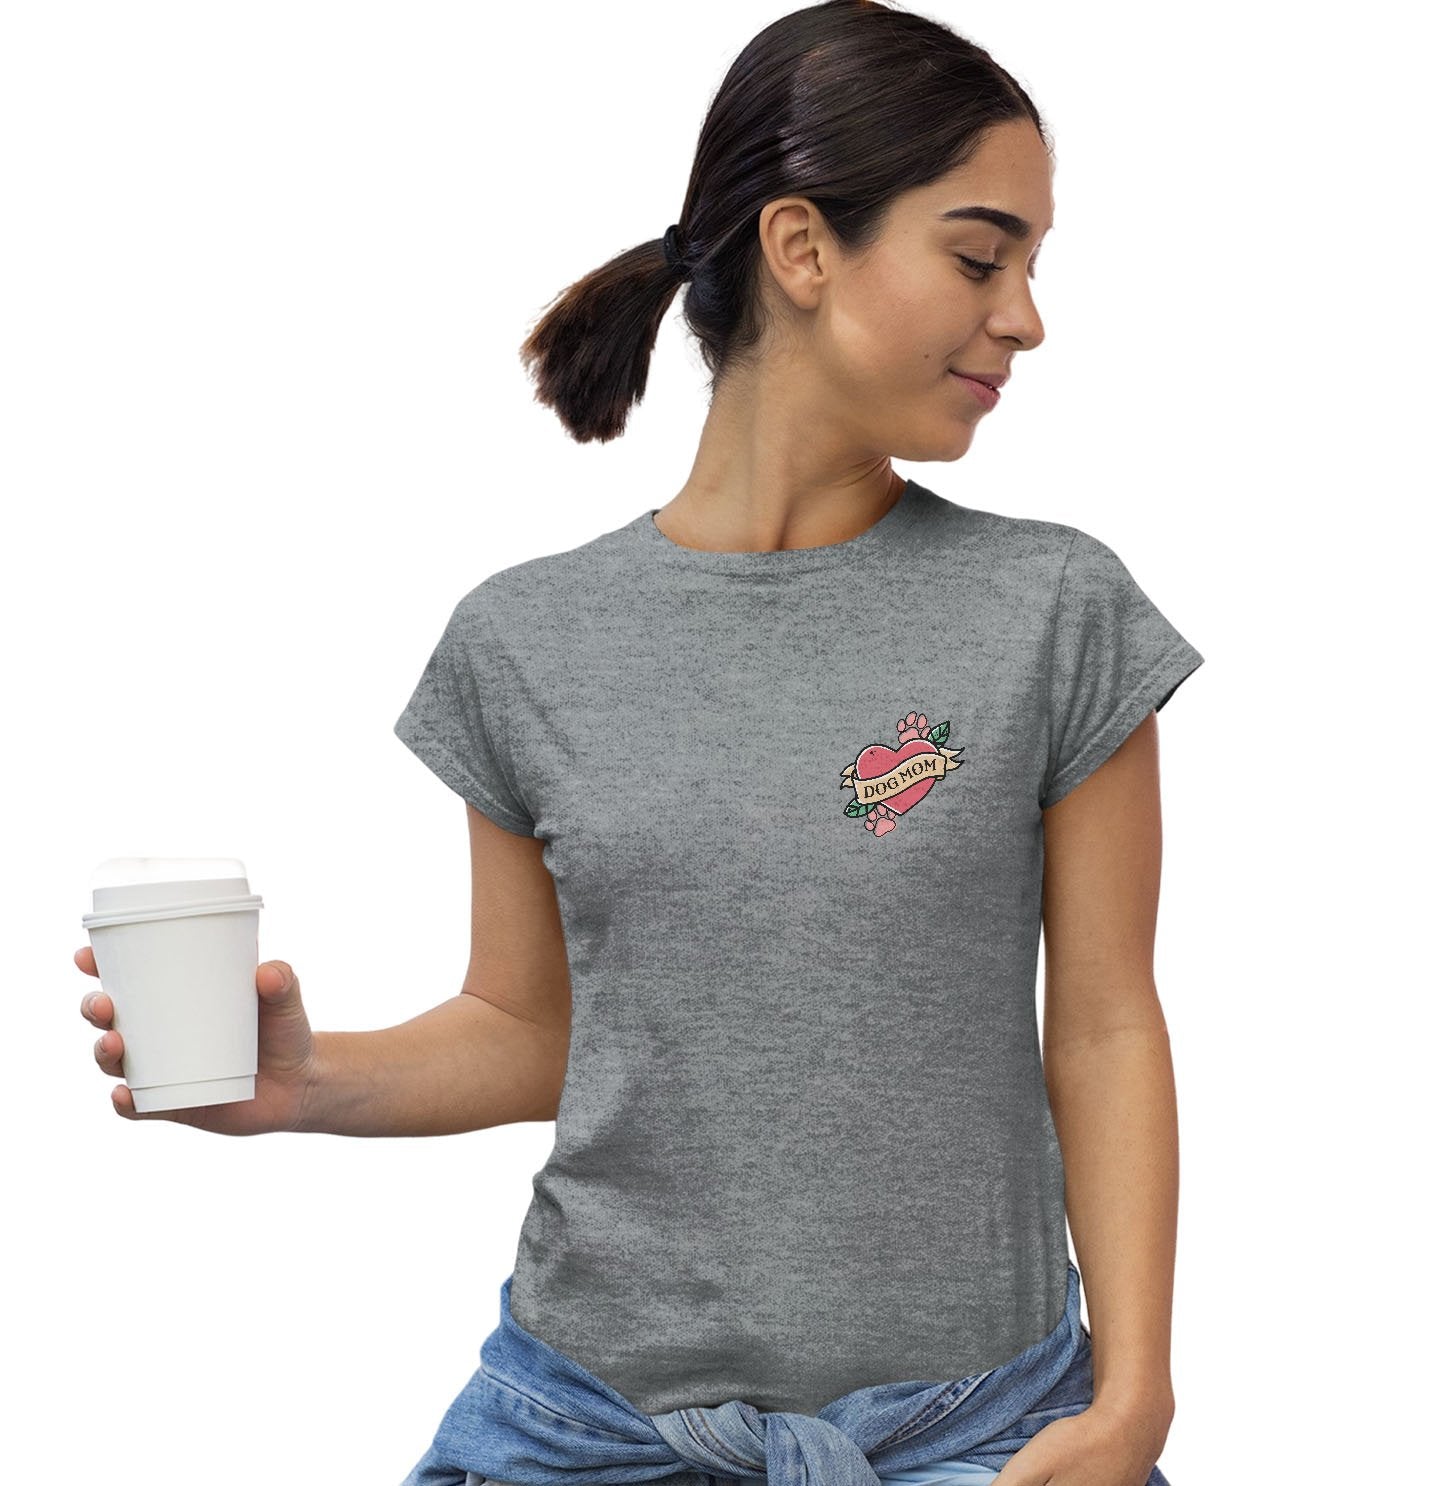 Dog Mom Heart - Pocket - Women's Fitted T-Shirt